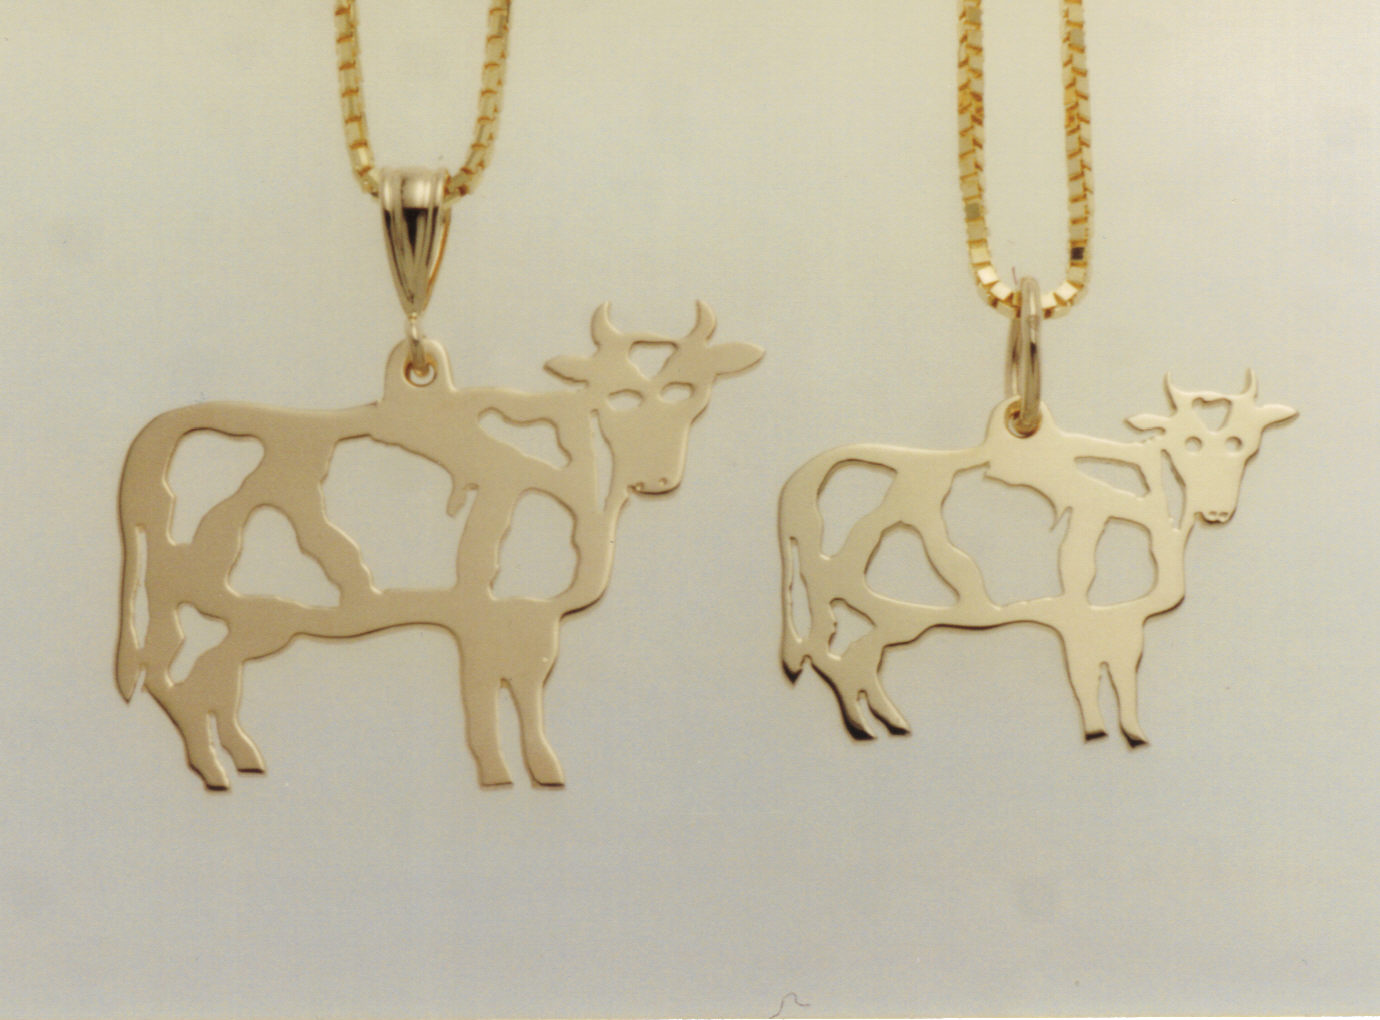 Wis-cow-sin Cow Pendant and Charm in 14K yellow gold